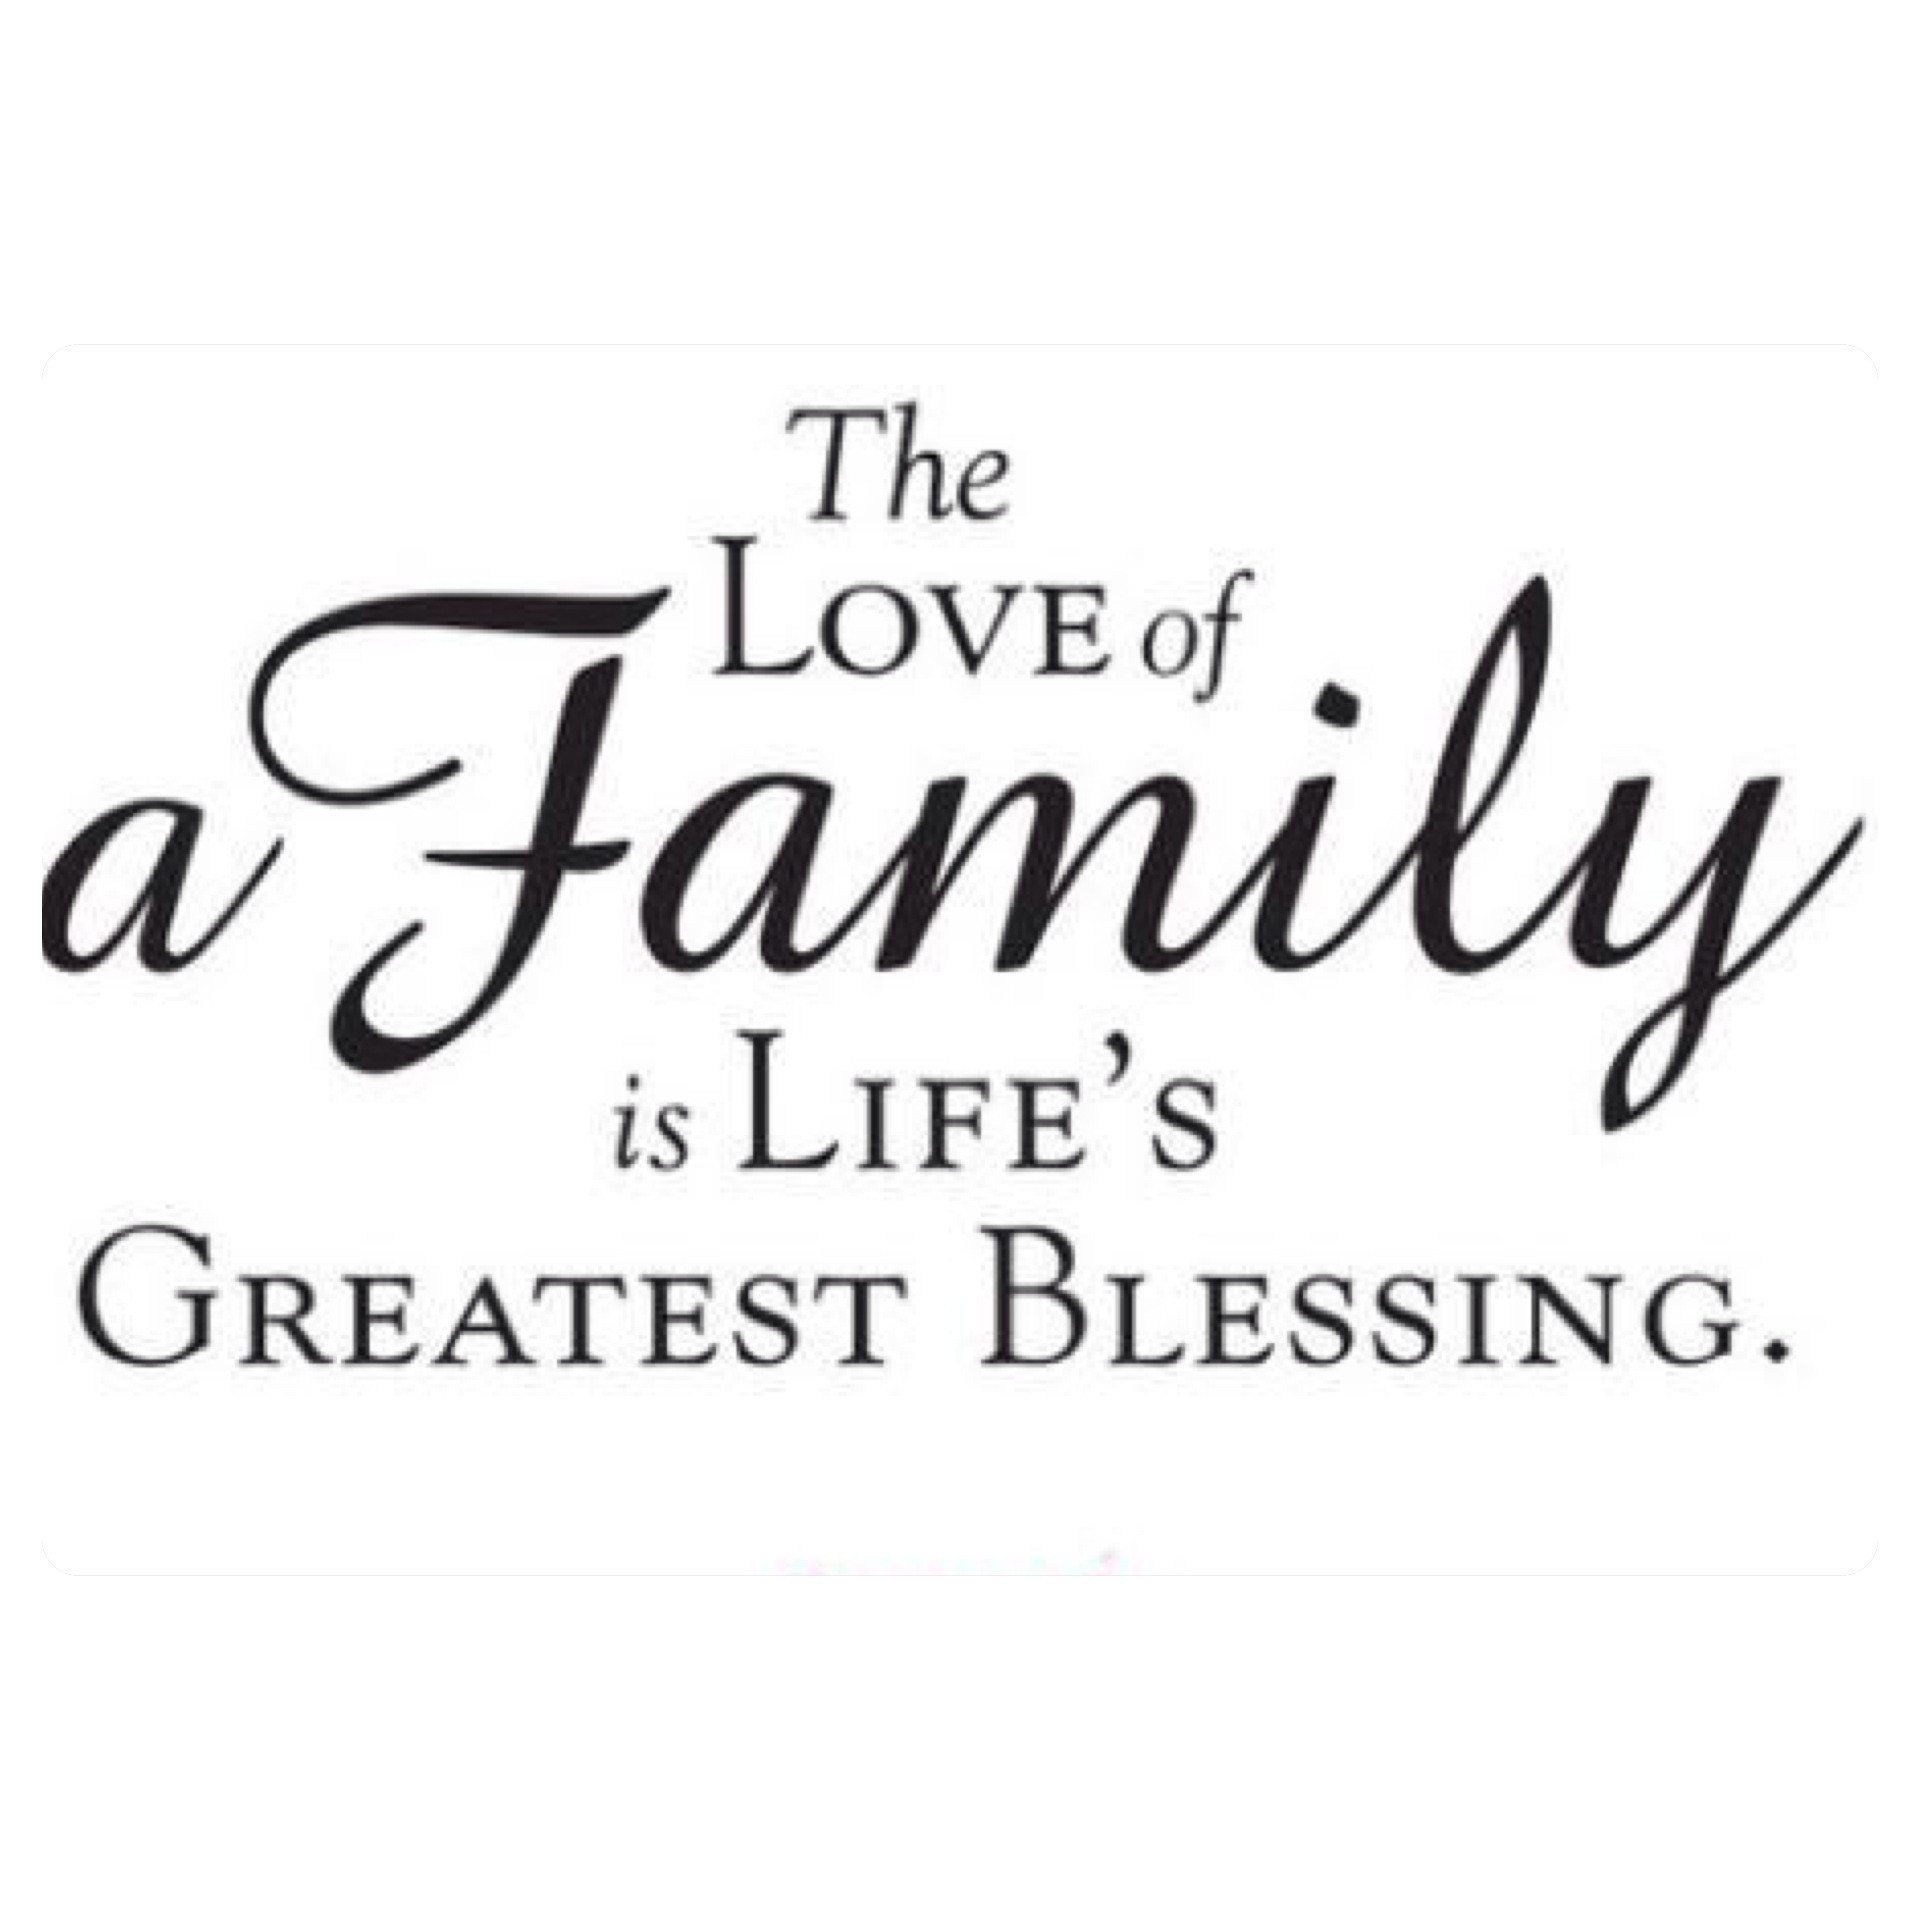 Family Bonding Quotes
 Quotes about Family bonding 52 quotes